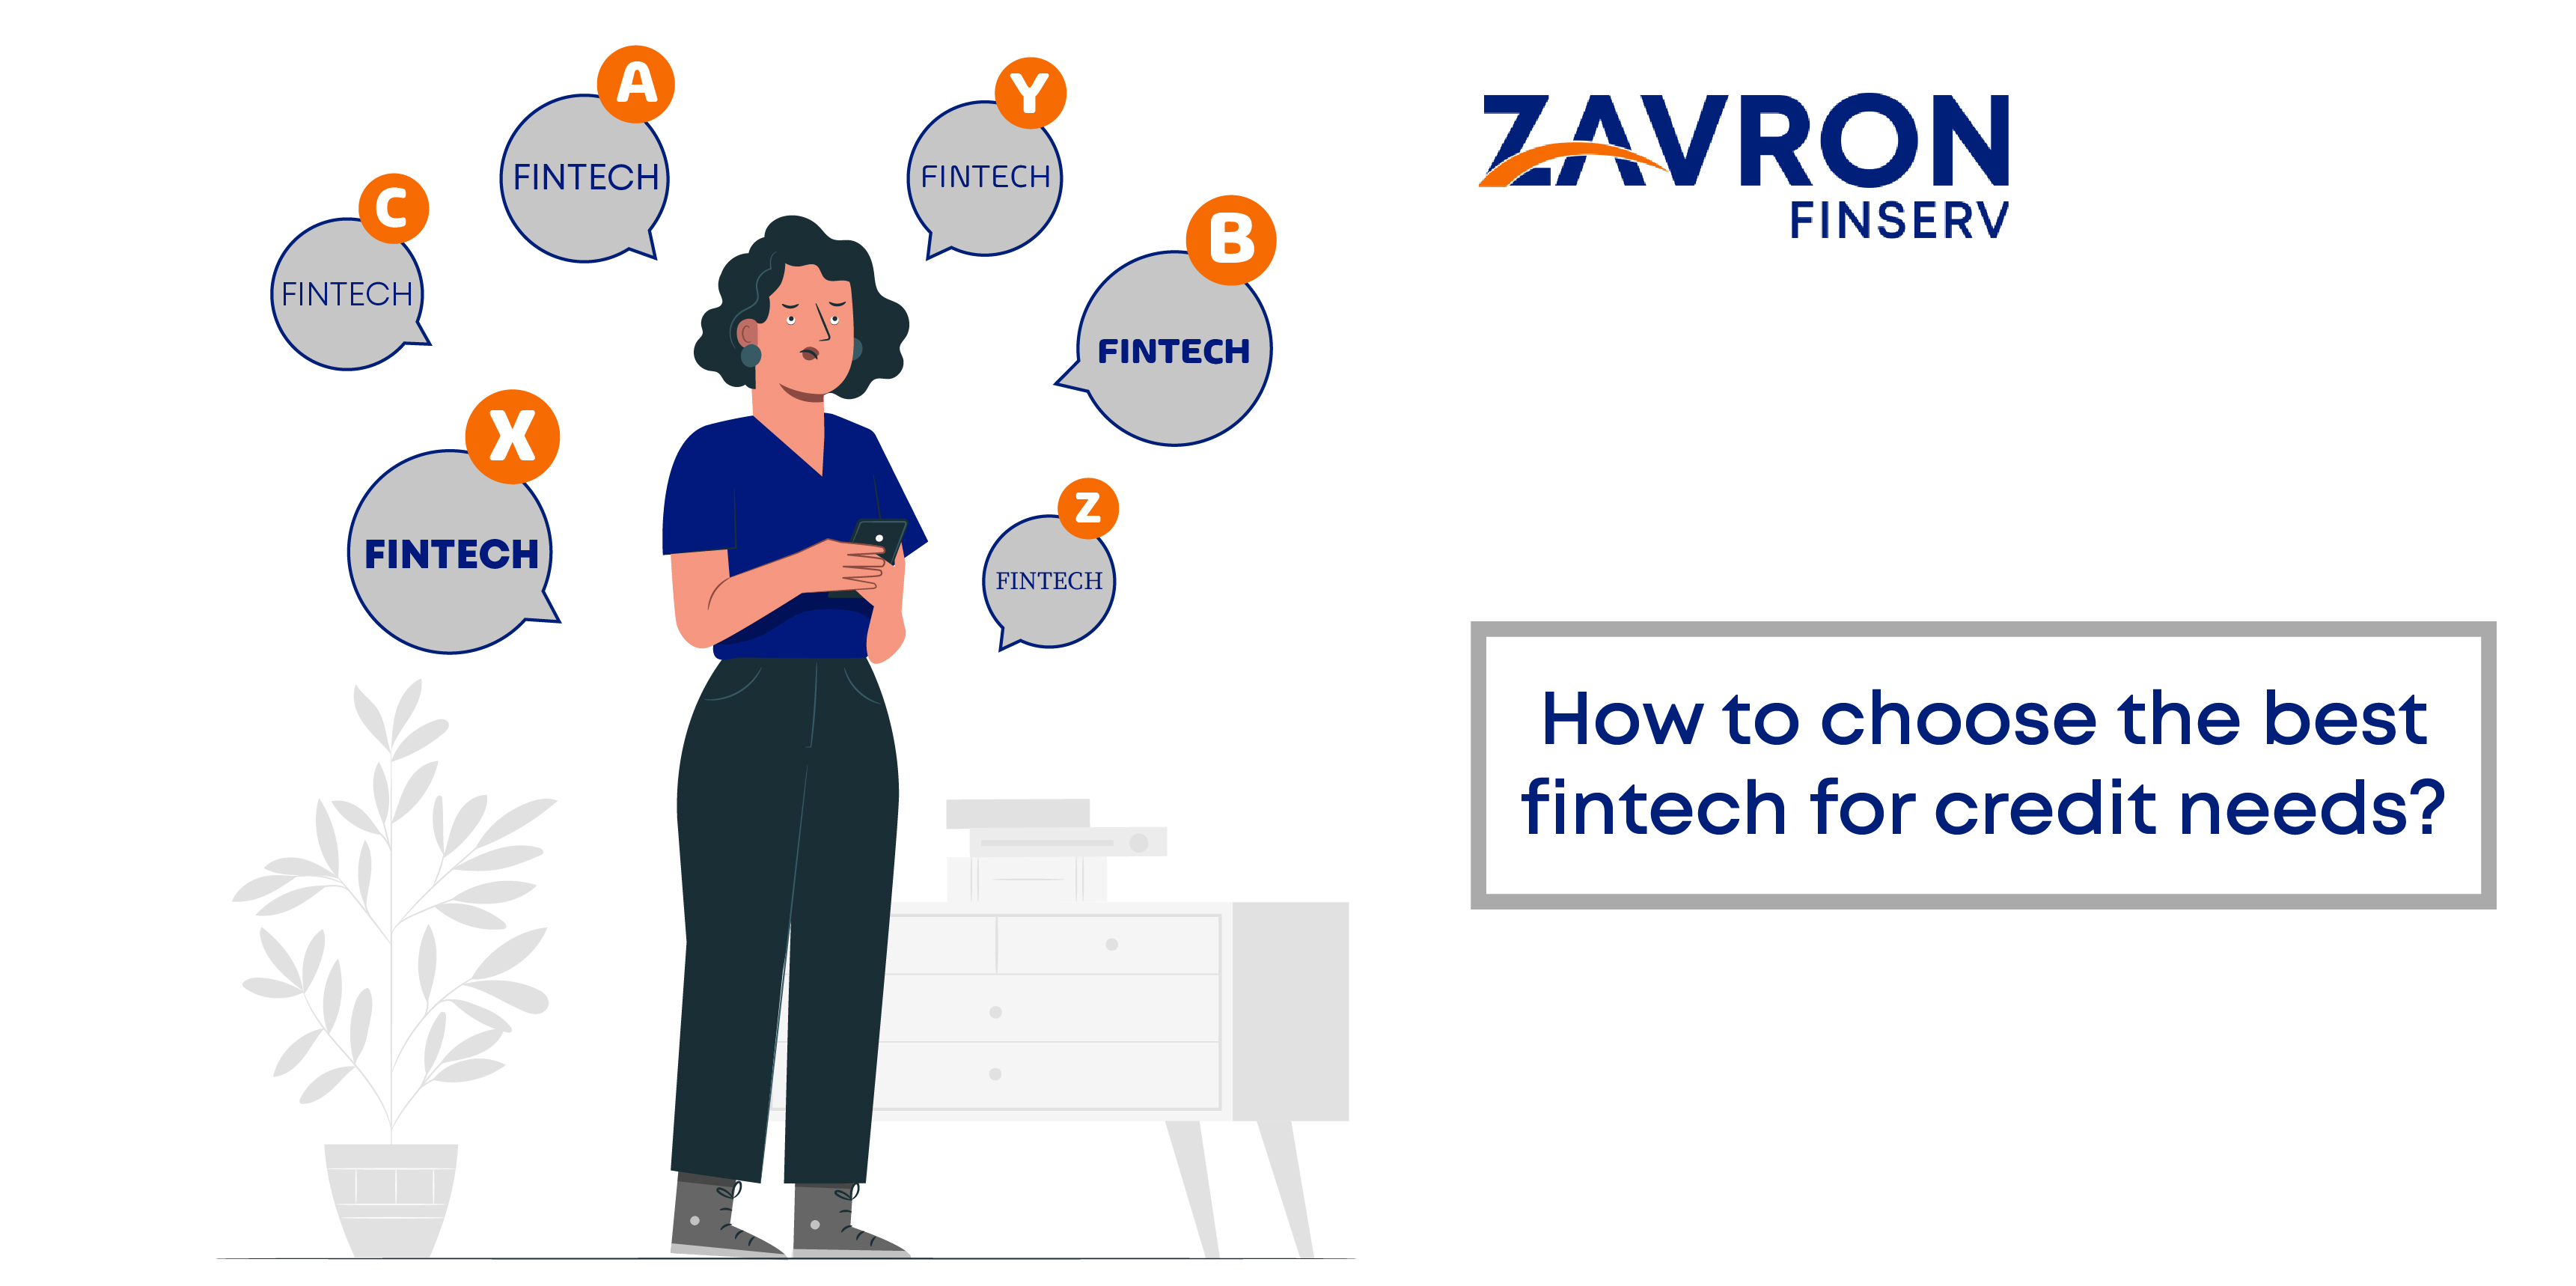 How to choose the best fintech for credit needs?